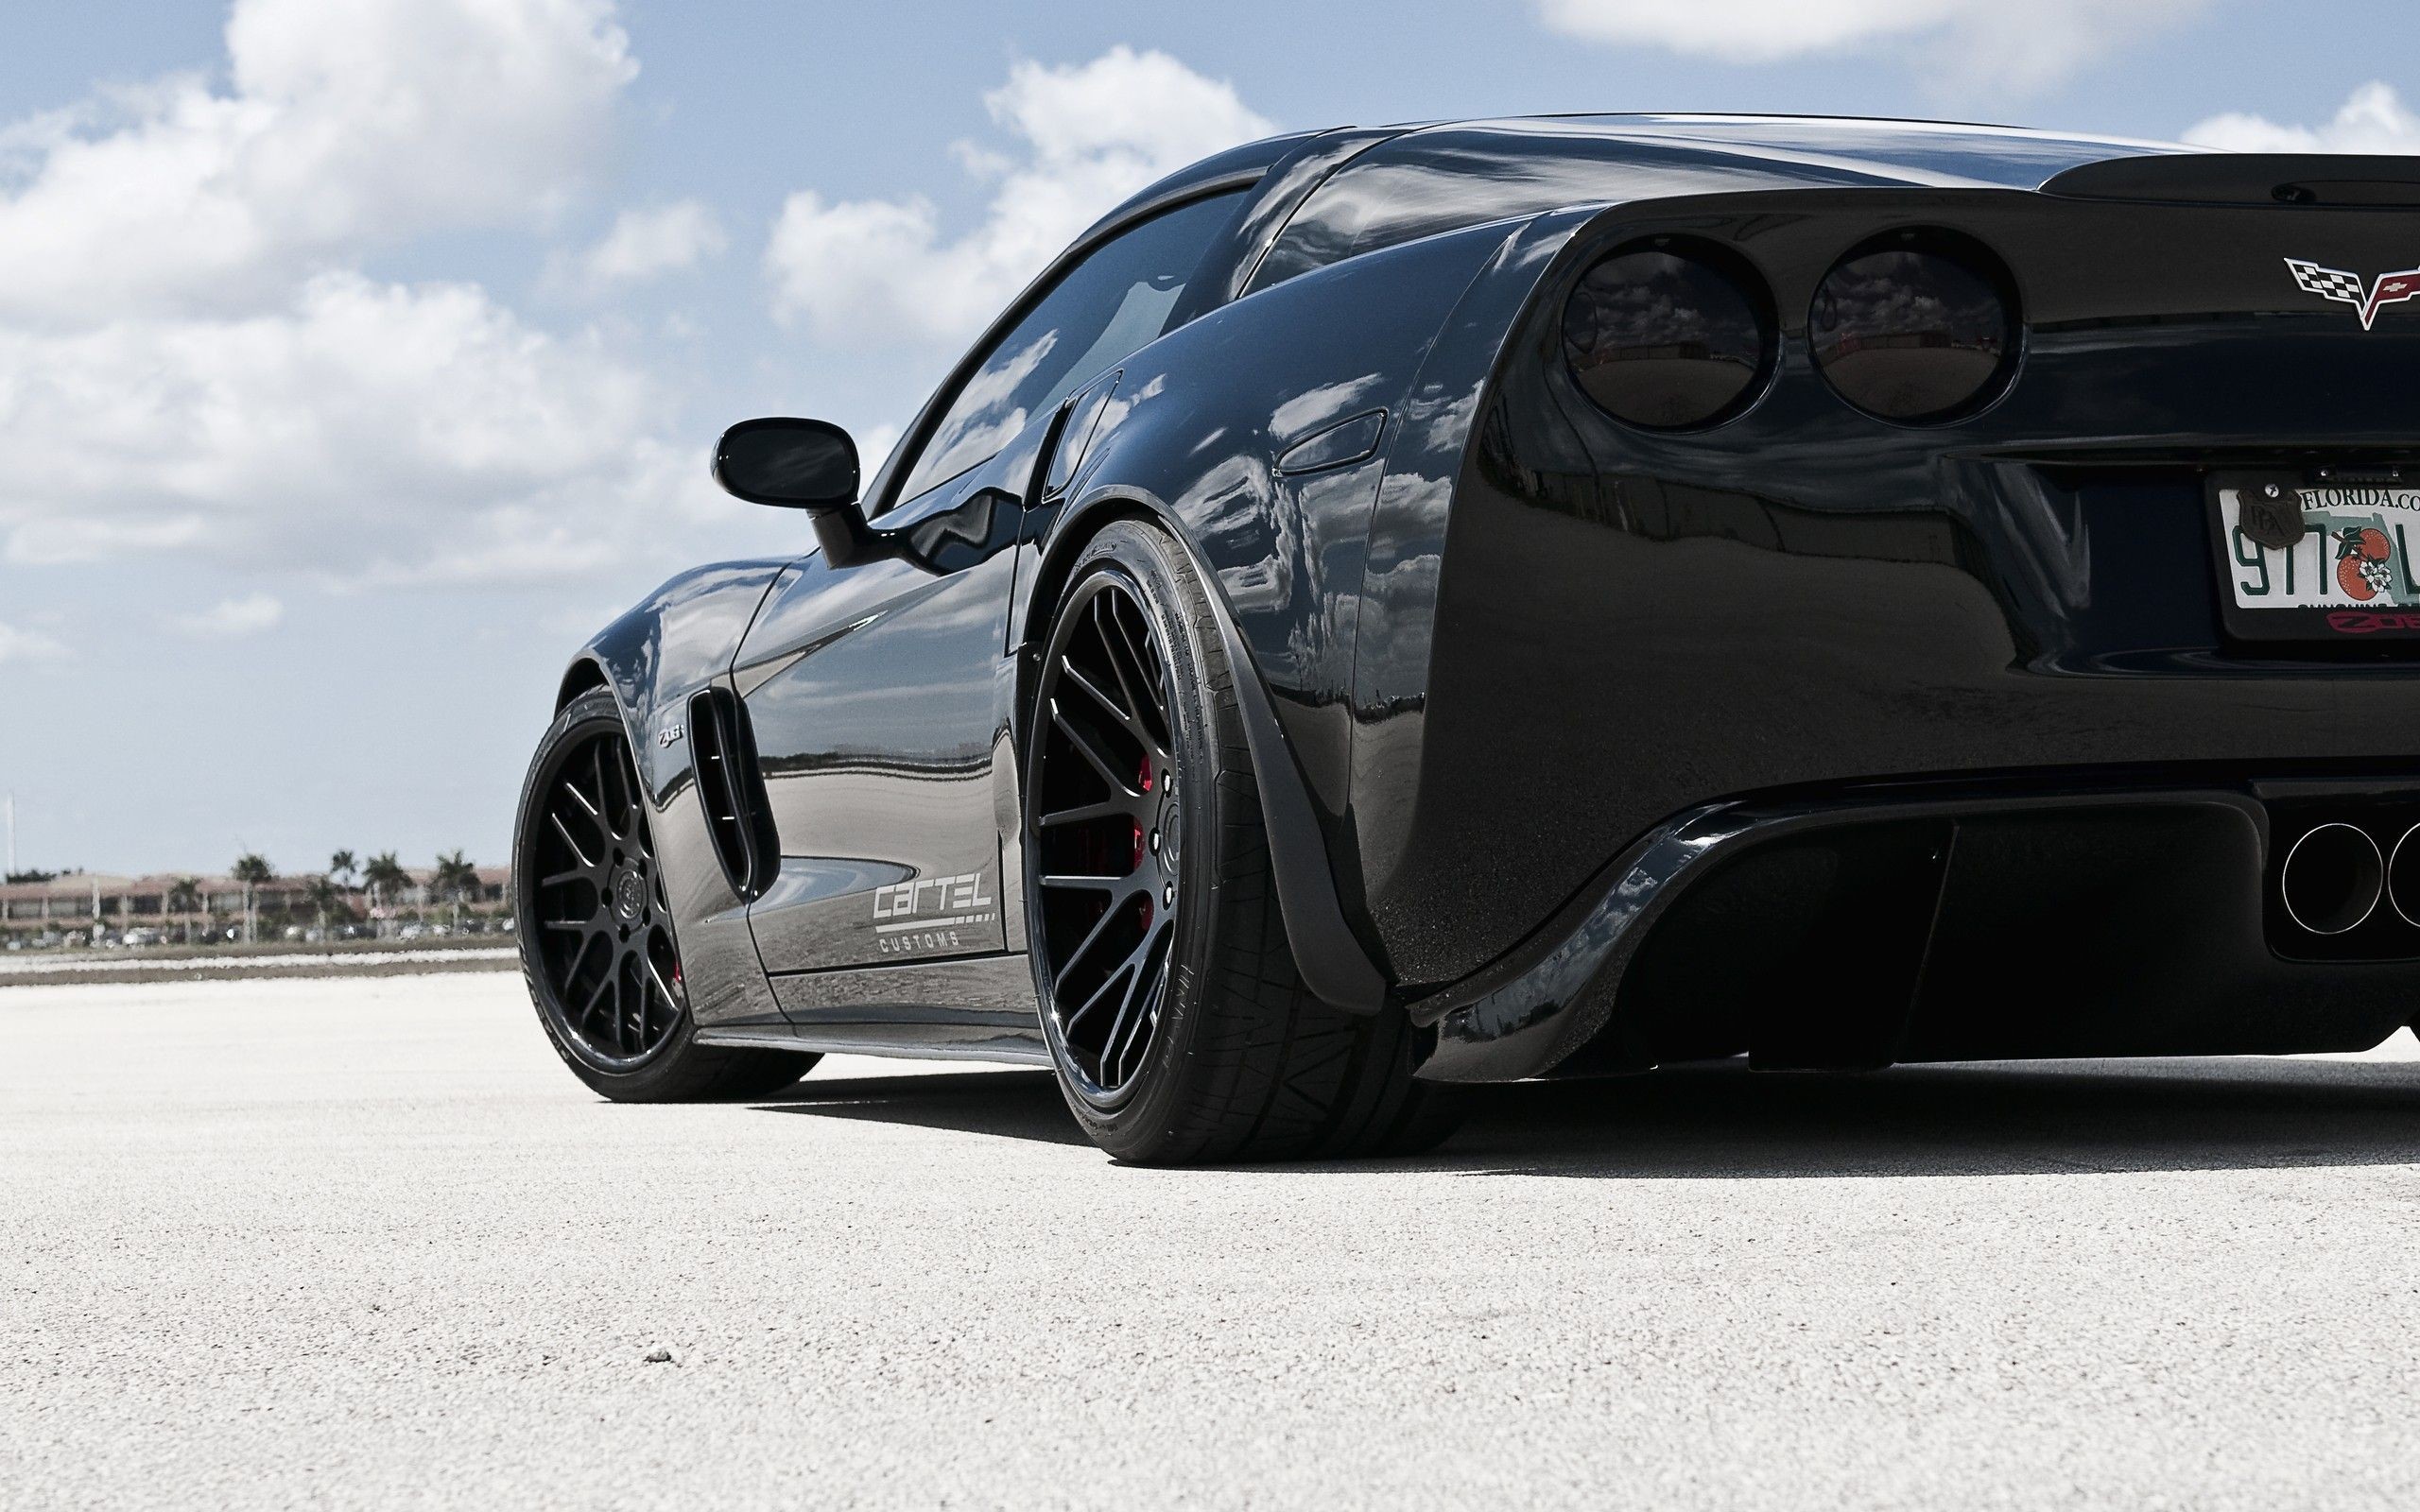 2560x1600 1920x1080 undefined Corvette Wallpaper (49 Wallpapers) | Adorable Wallpapers  ...">